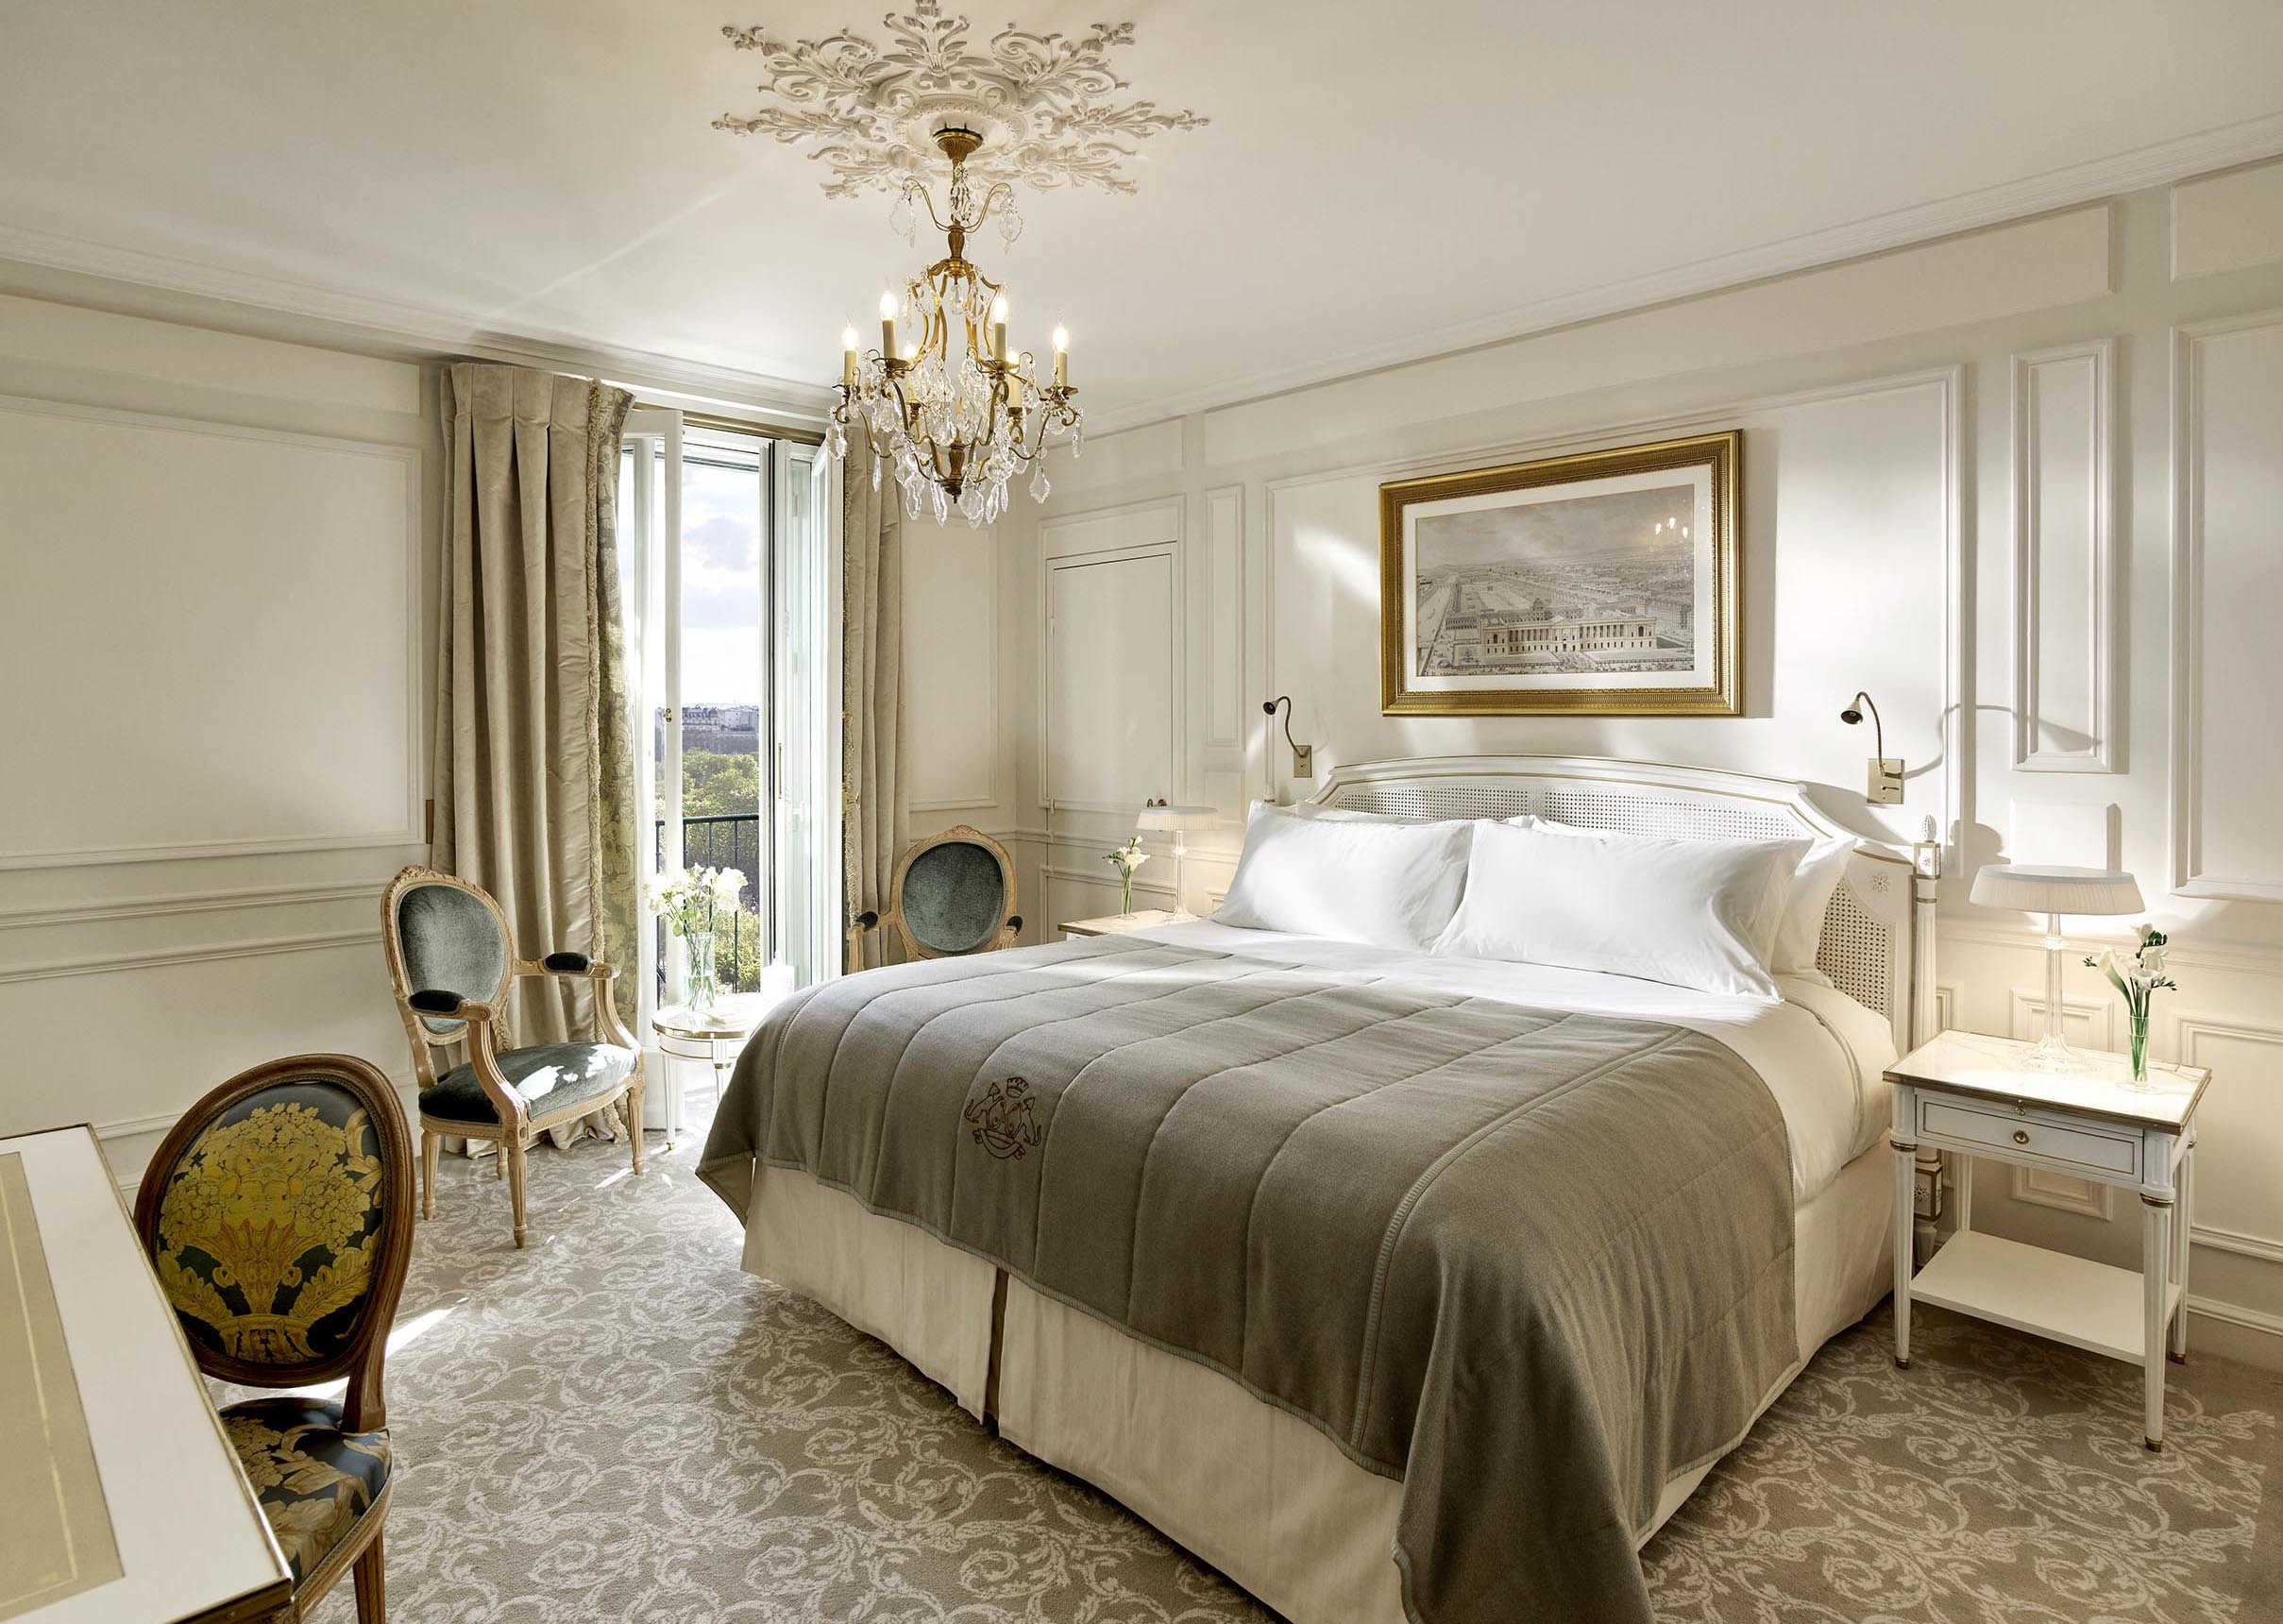 news-main-le-meurice-unveils-masterfully-renovated-new-rooms-and-suites.1562588878.jpg